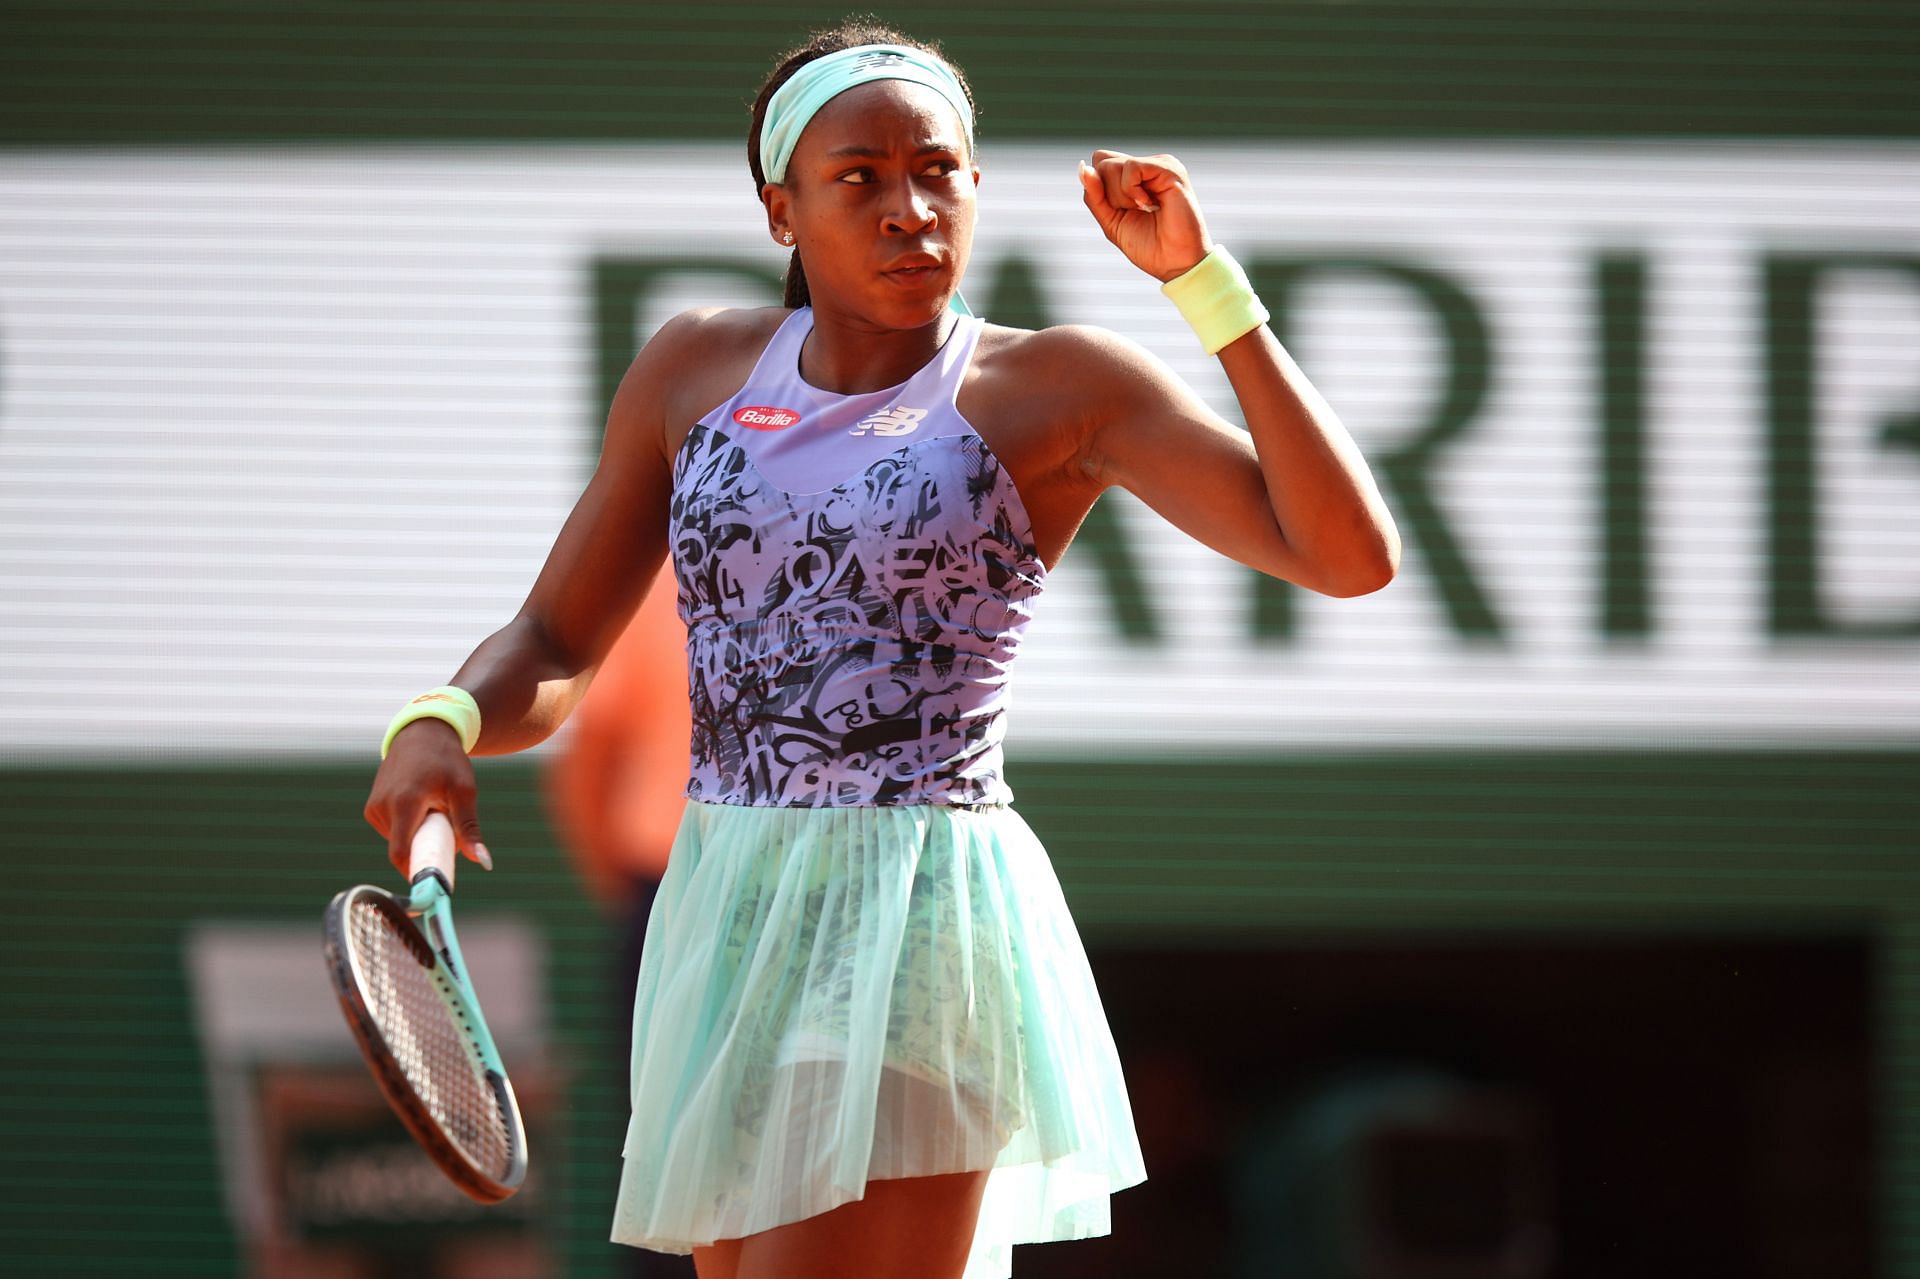 Coco Gauff takes on Iga Swiatek in the final of the 2022 French Open